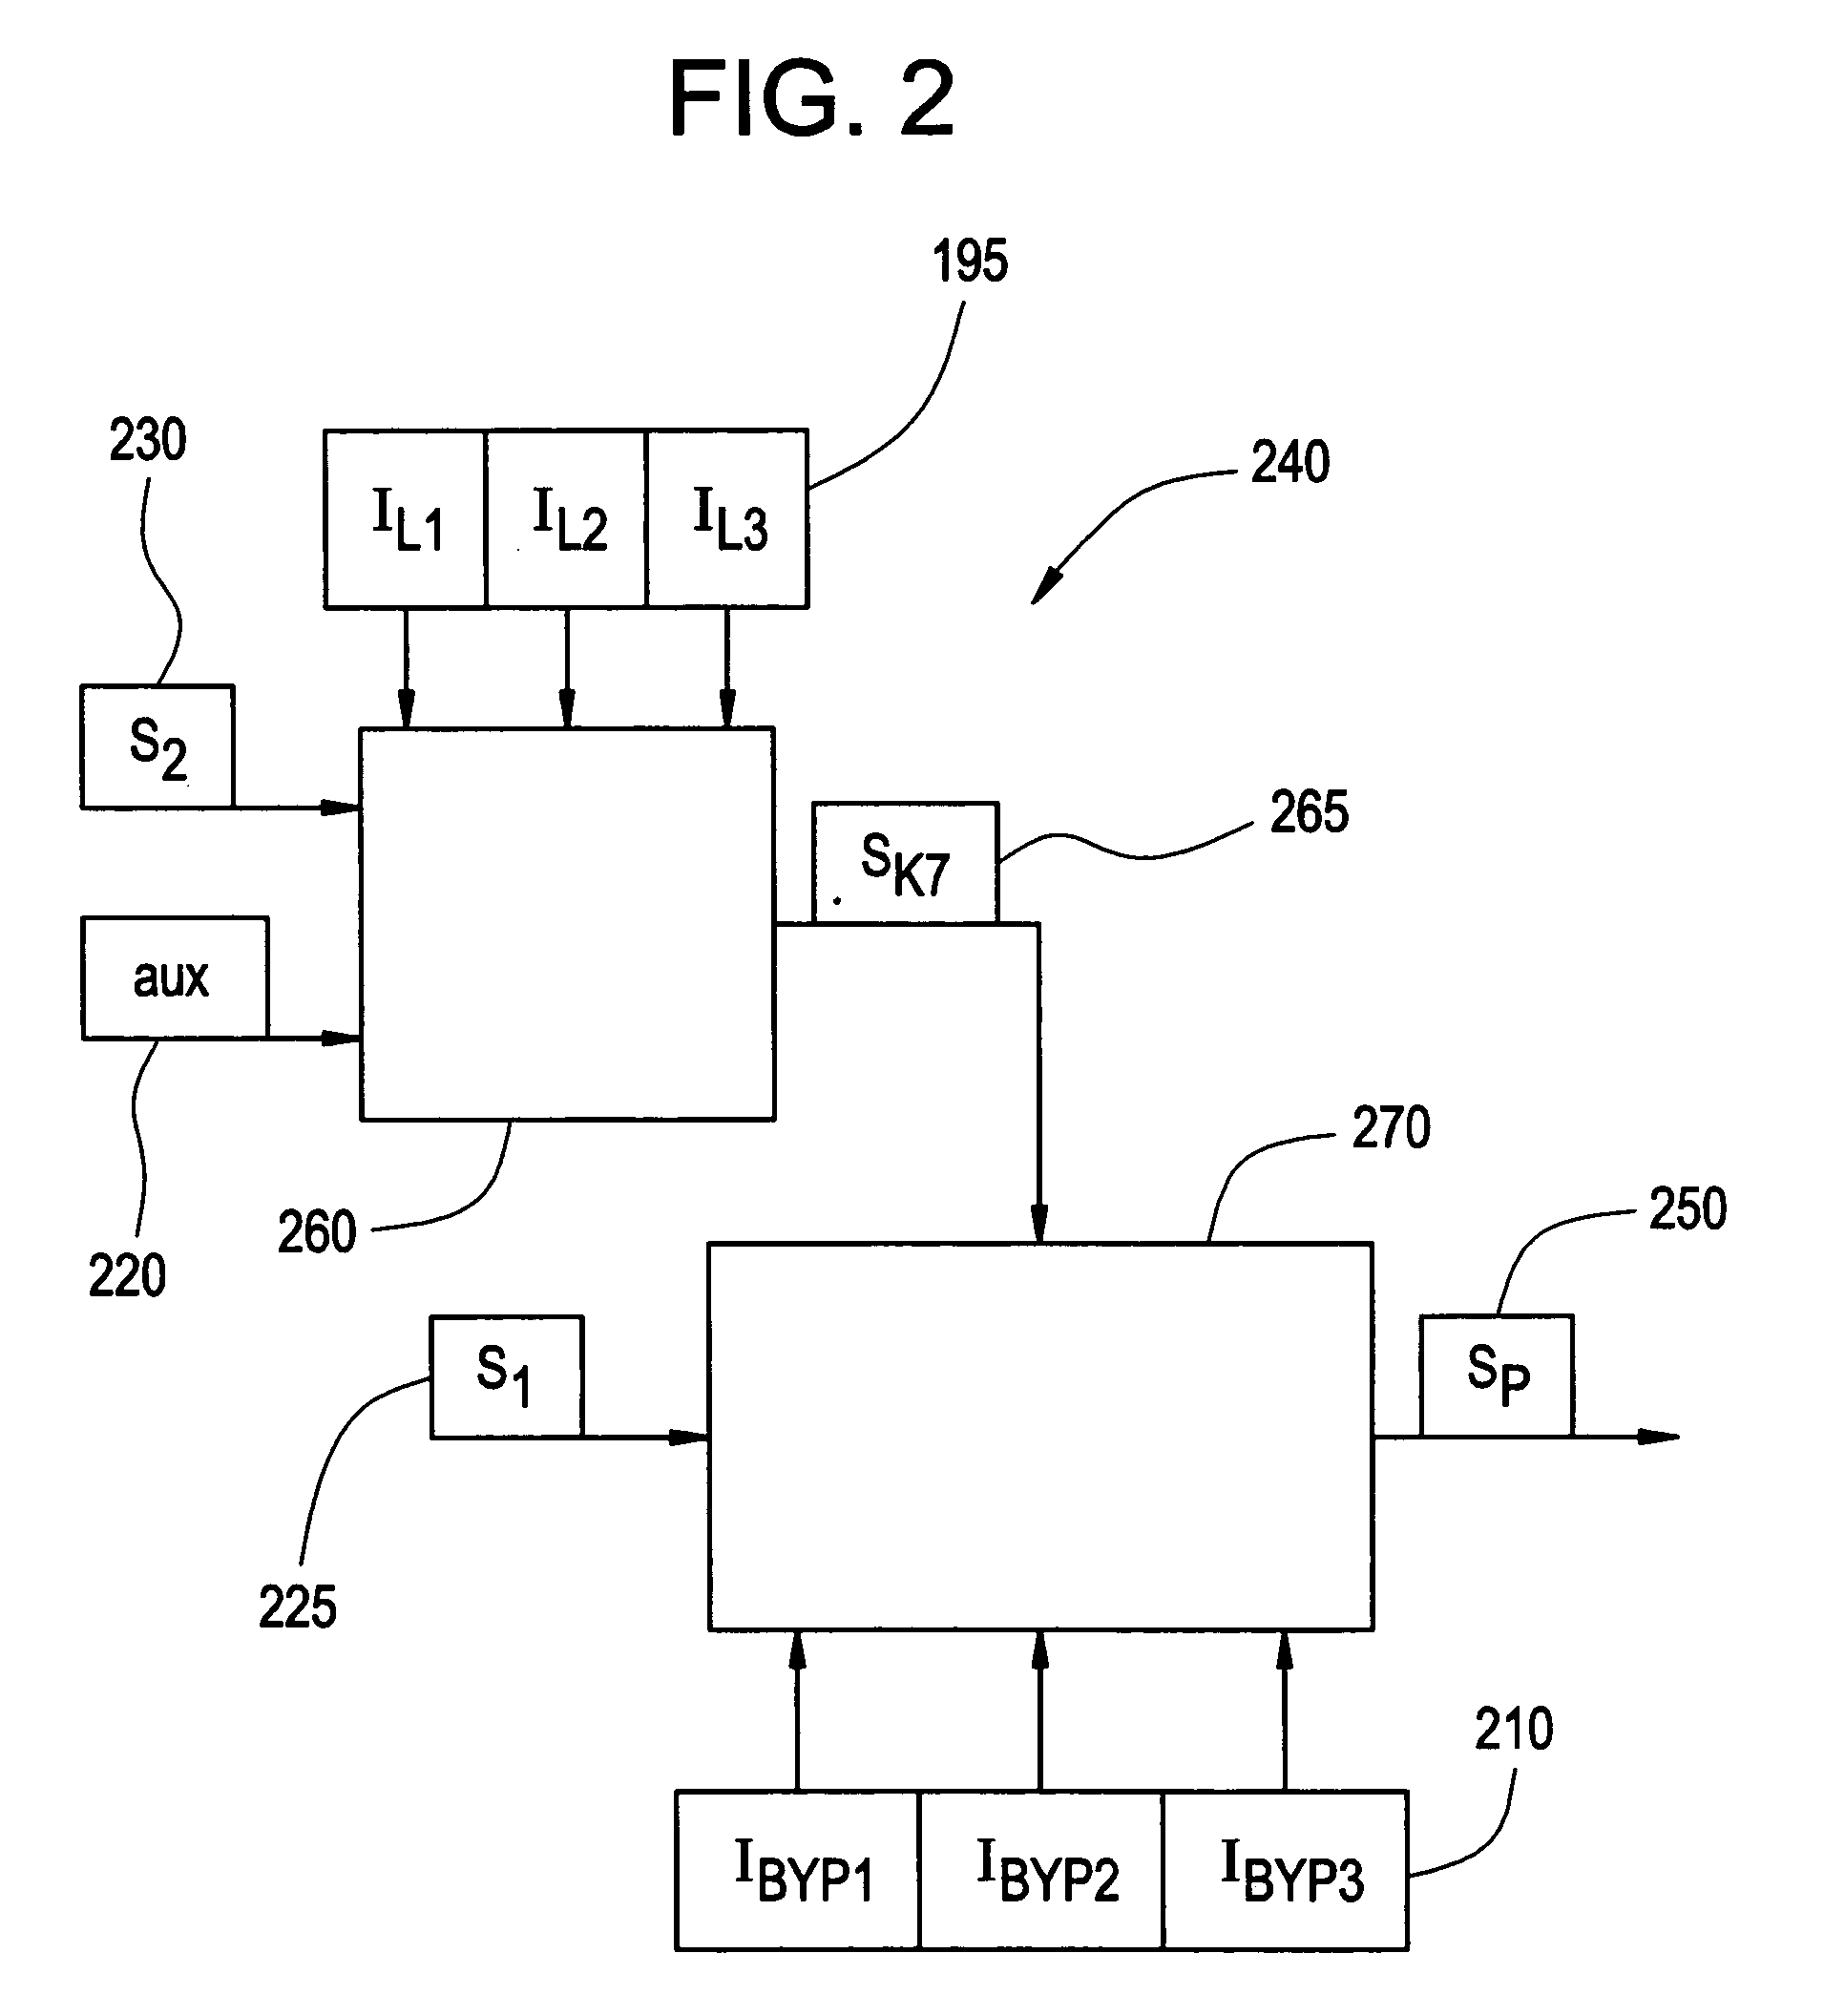 Control system, method and product for uninterruptible power supply